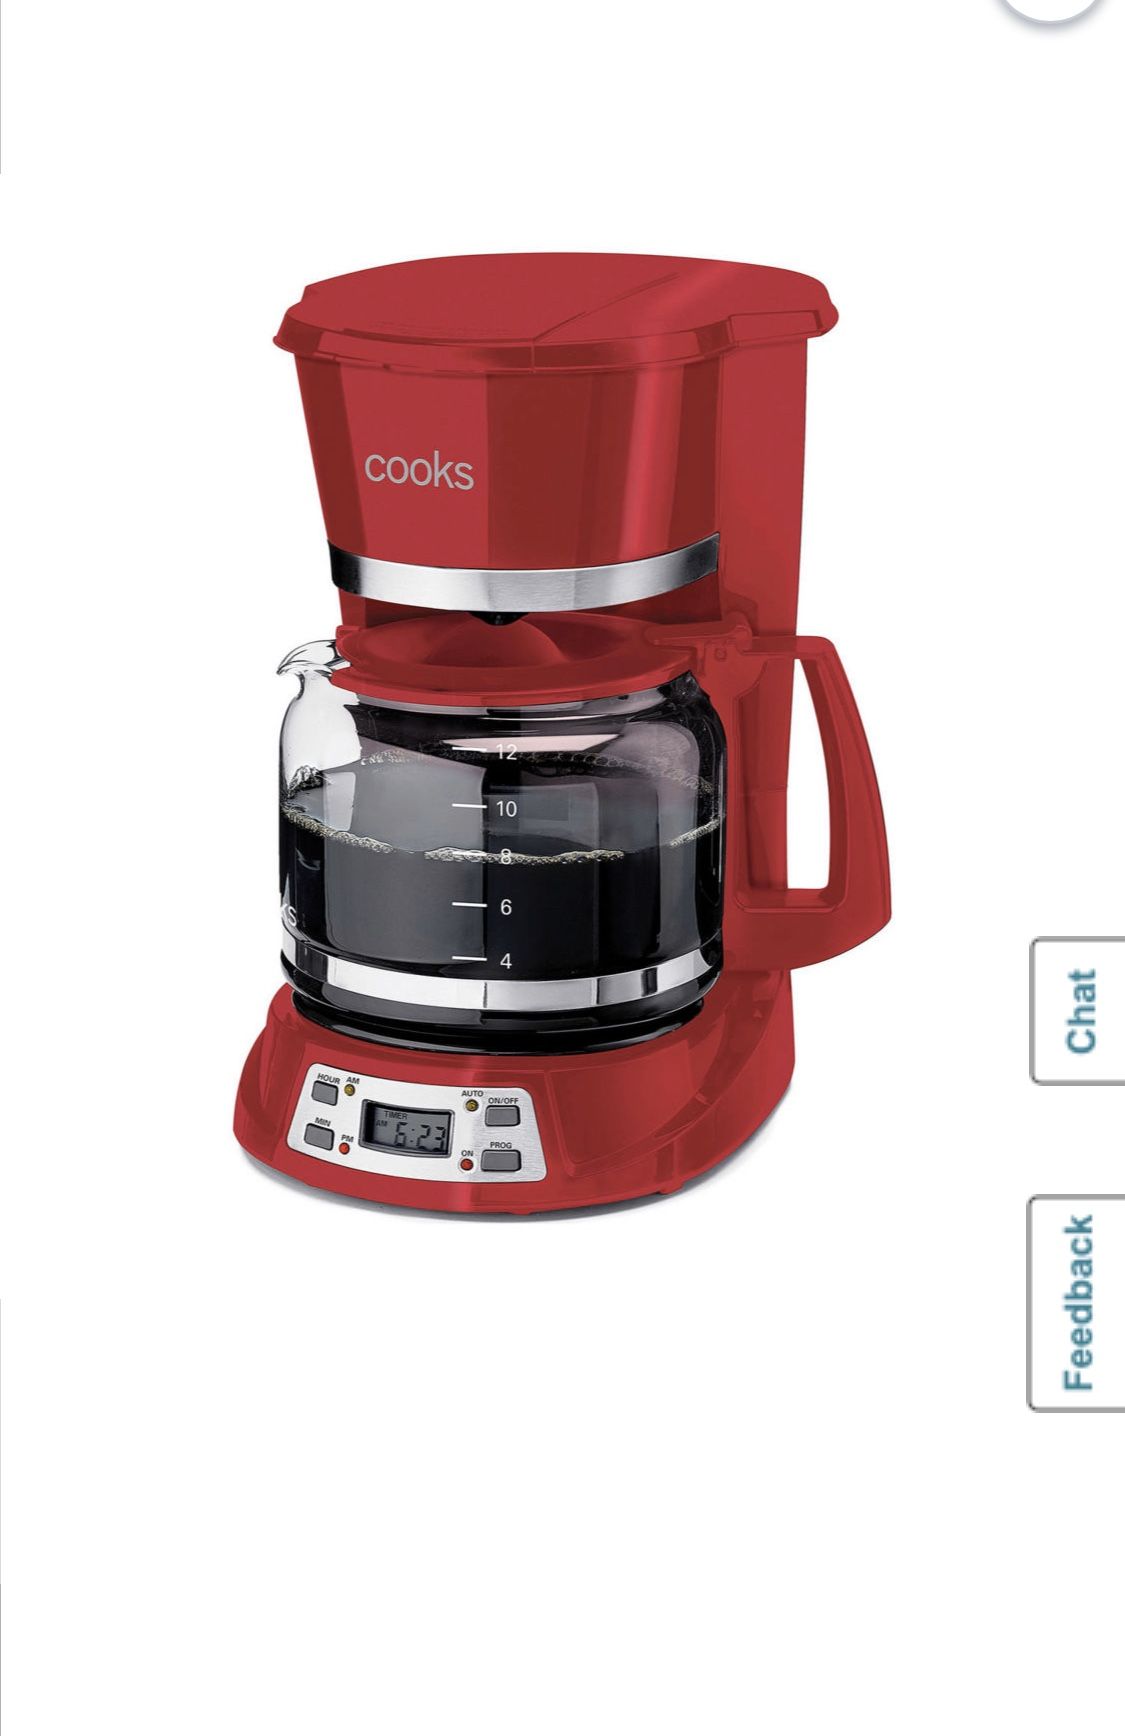 Cooks 12 Cup Coffee Maker Auto Shutoff Red